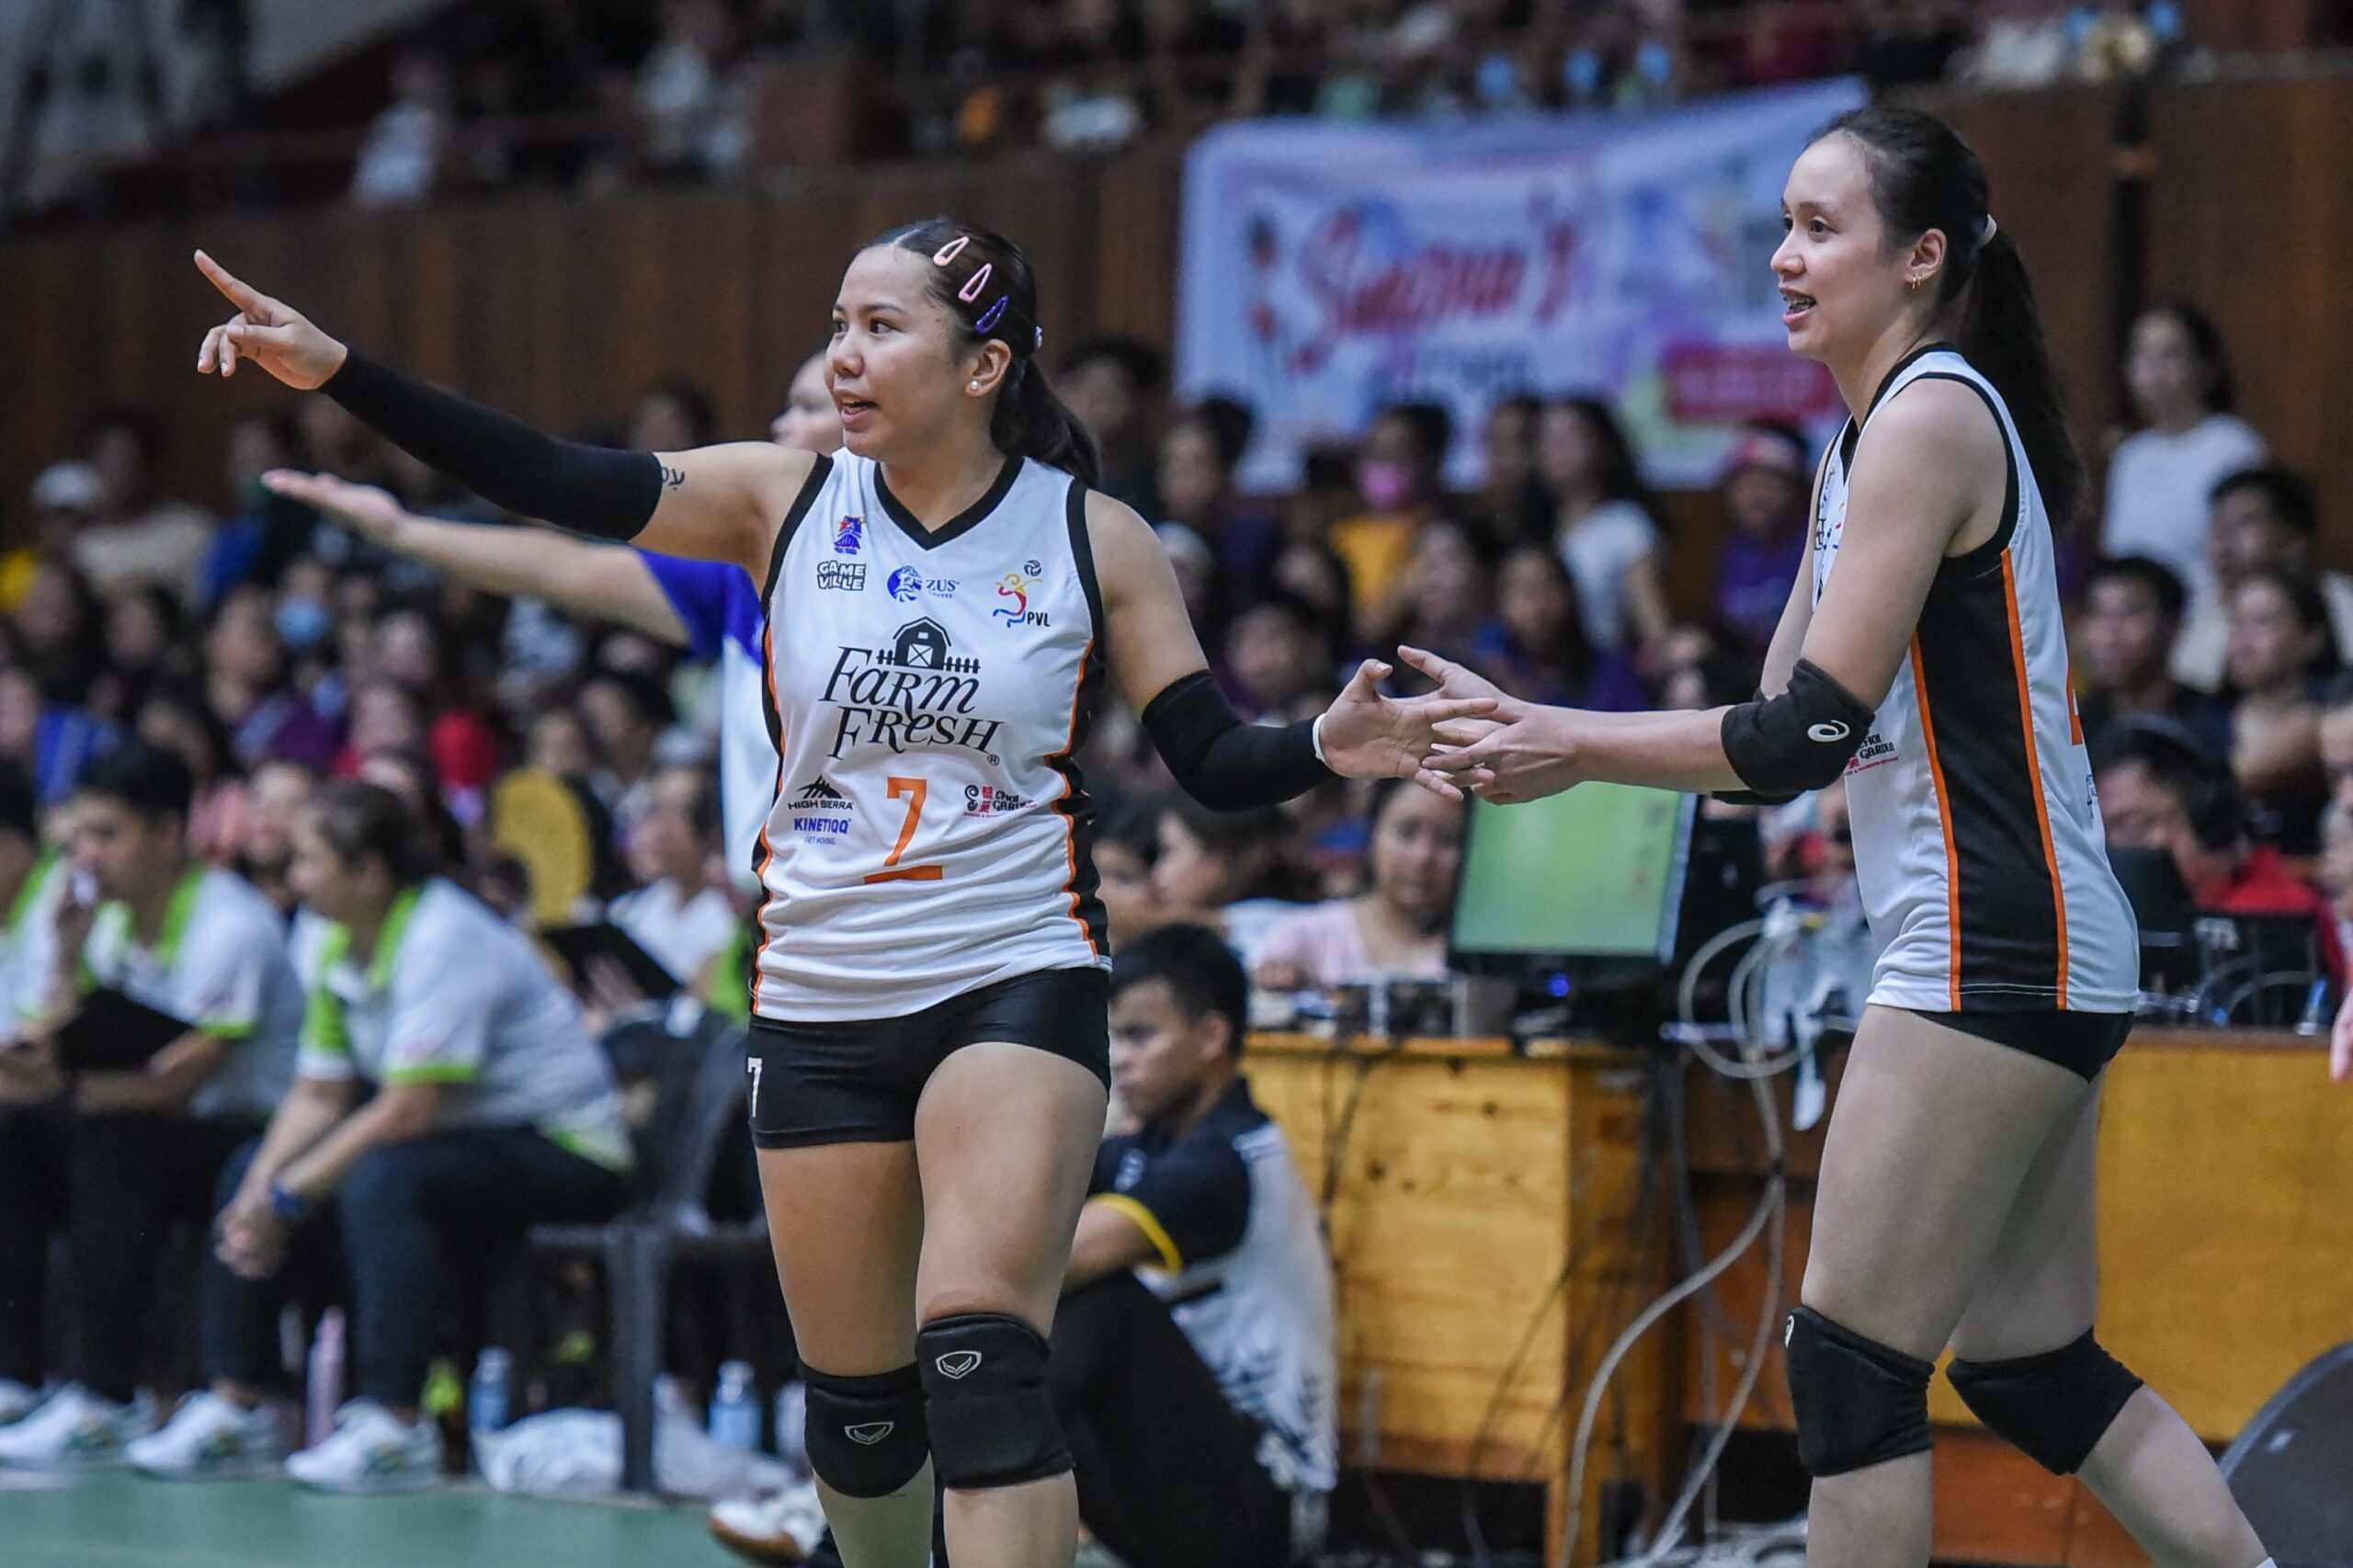 PVL-AFC-Nxled-vs.-Farm-Fresh-Louie-Romero-7705-scaled PVL: Nxled ends campaign on a high, repels Farm Fresh in 4 News PVL Volleyball  - philippine sports news